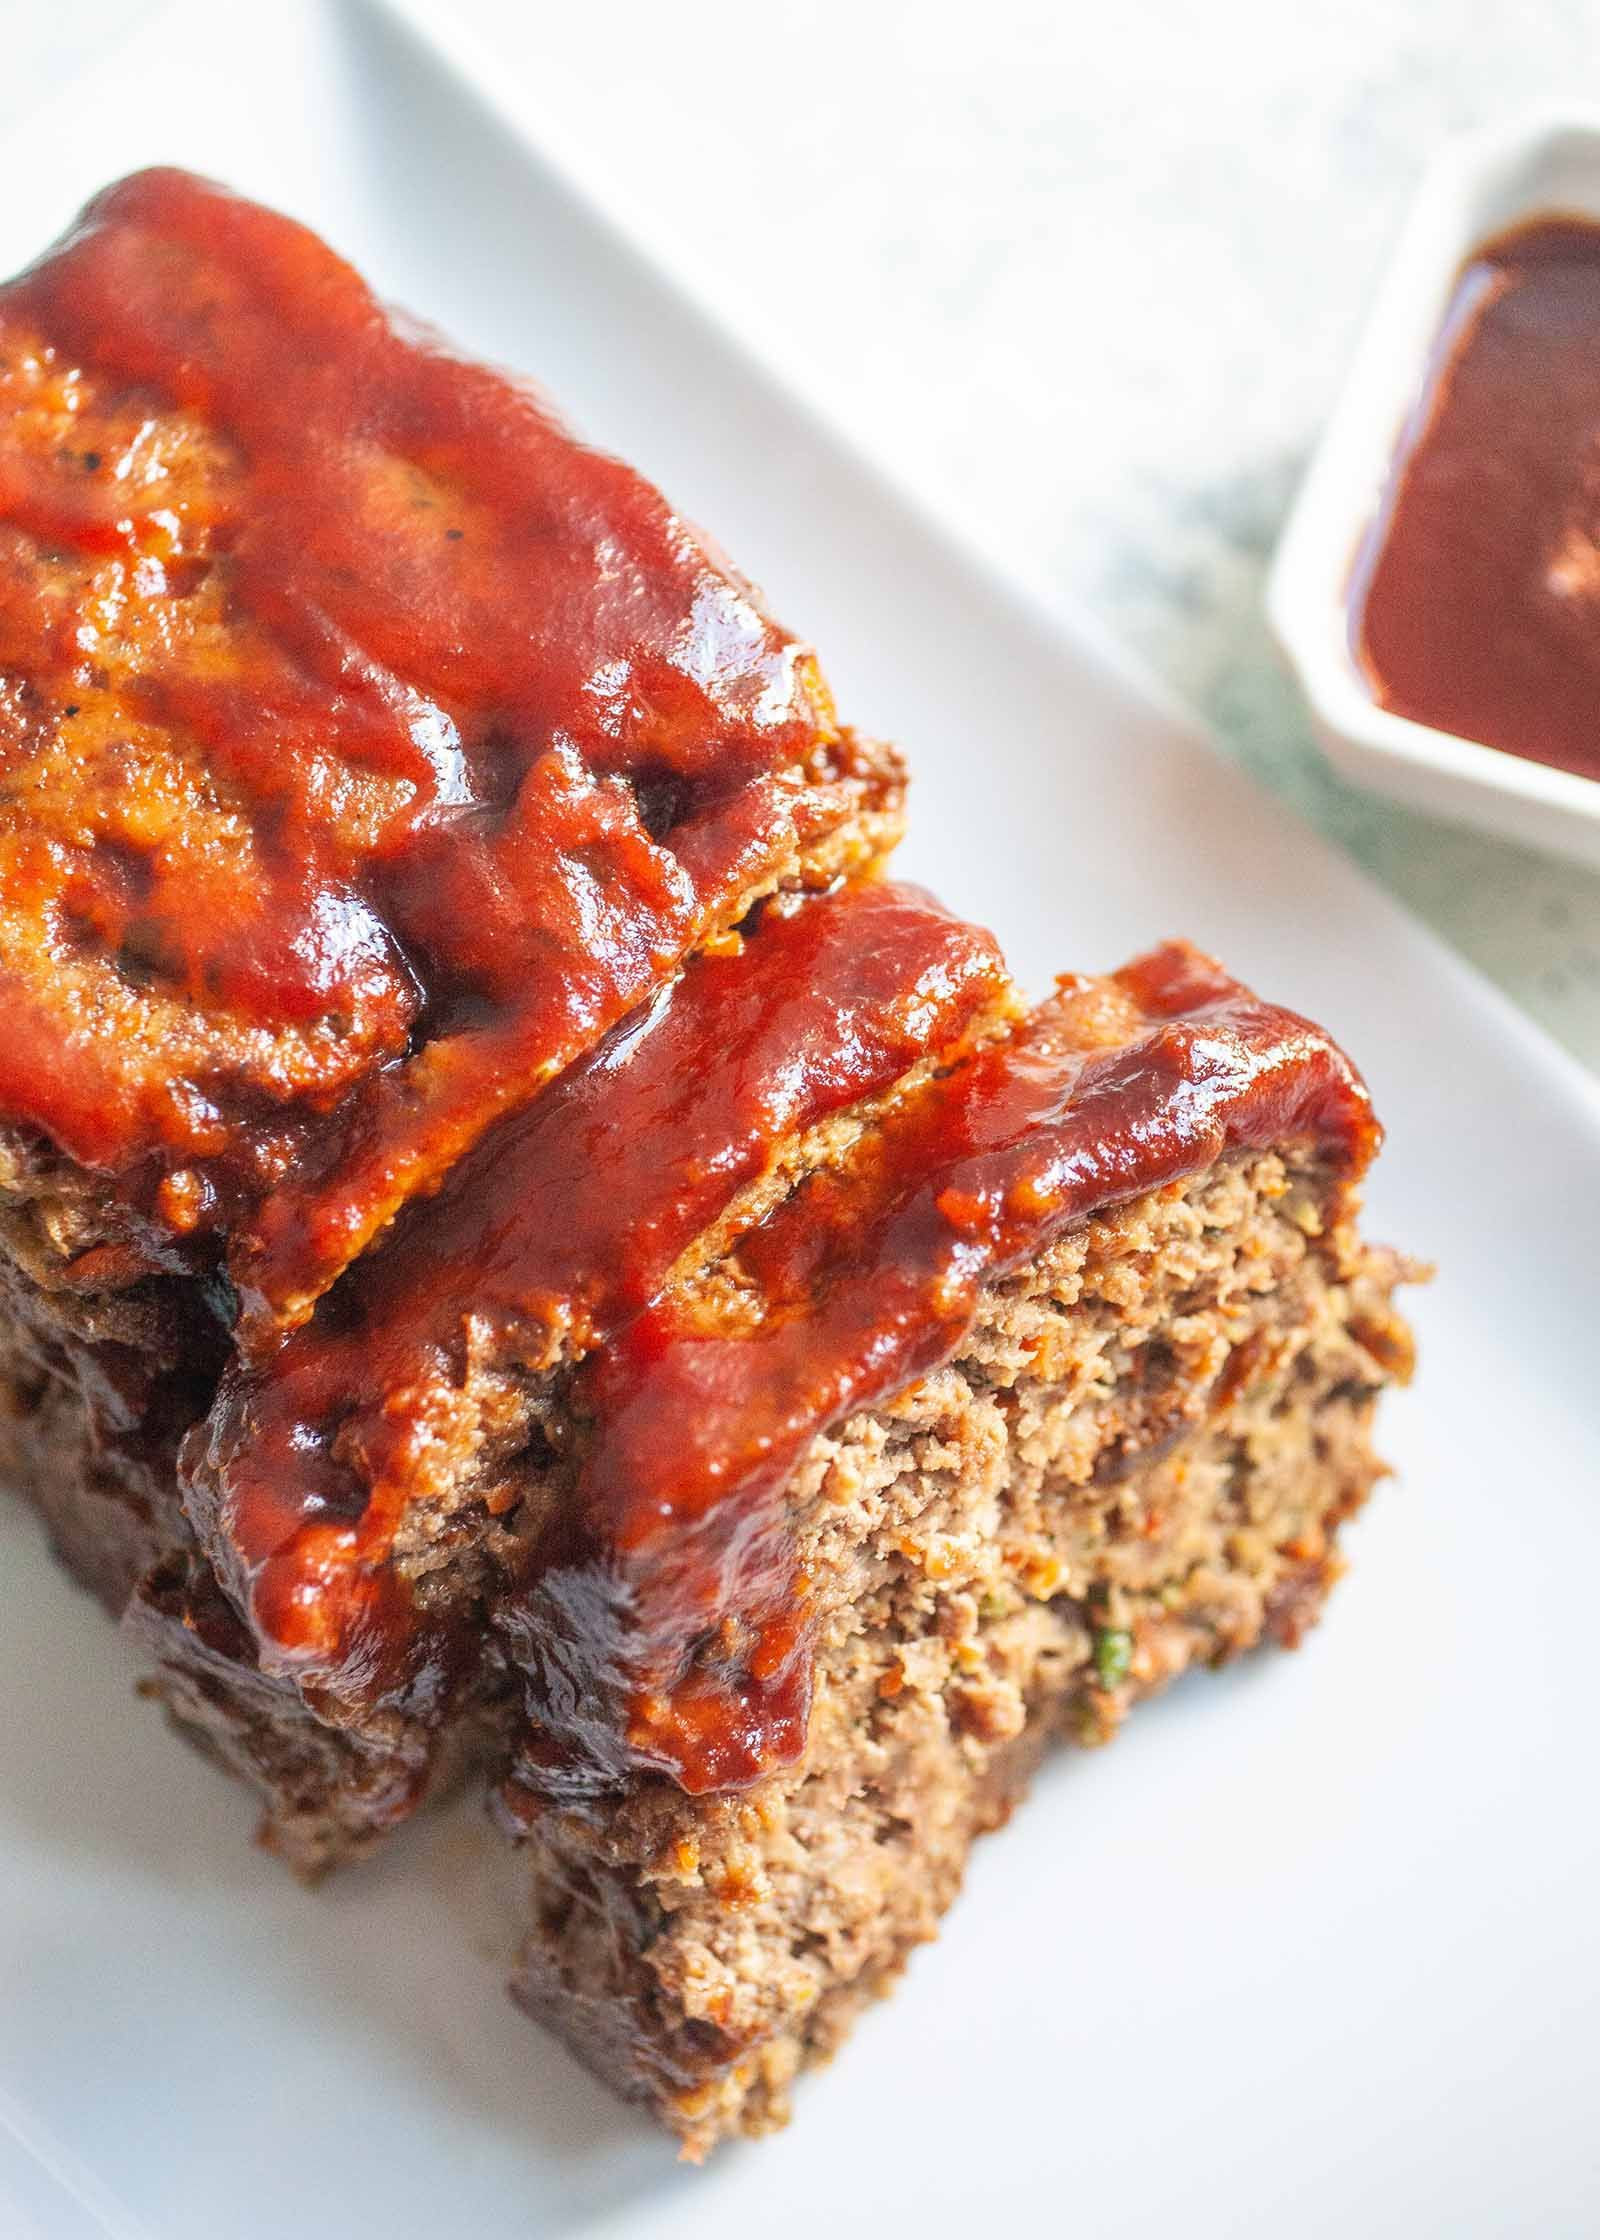 30 Of the Best Ideas for Gourmet Meatloaf Recipe - Home, Family, Style ...